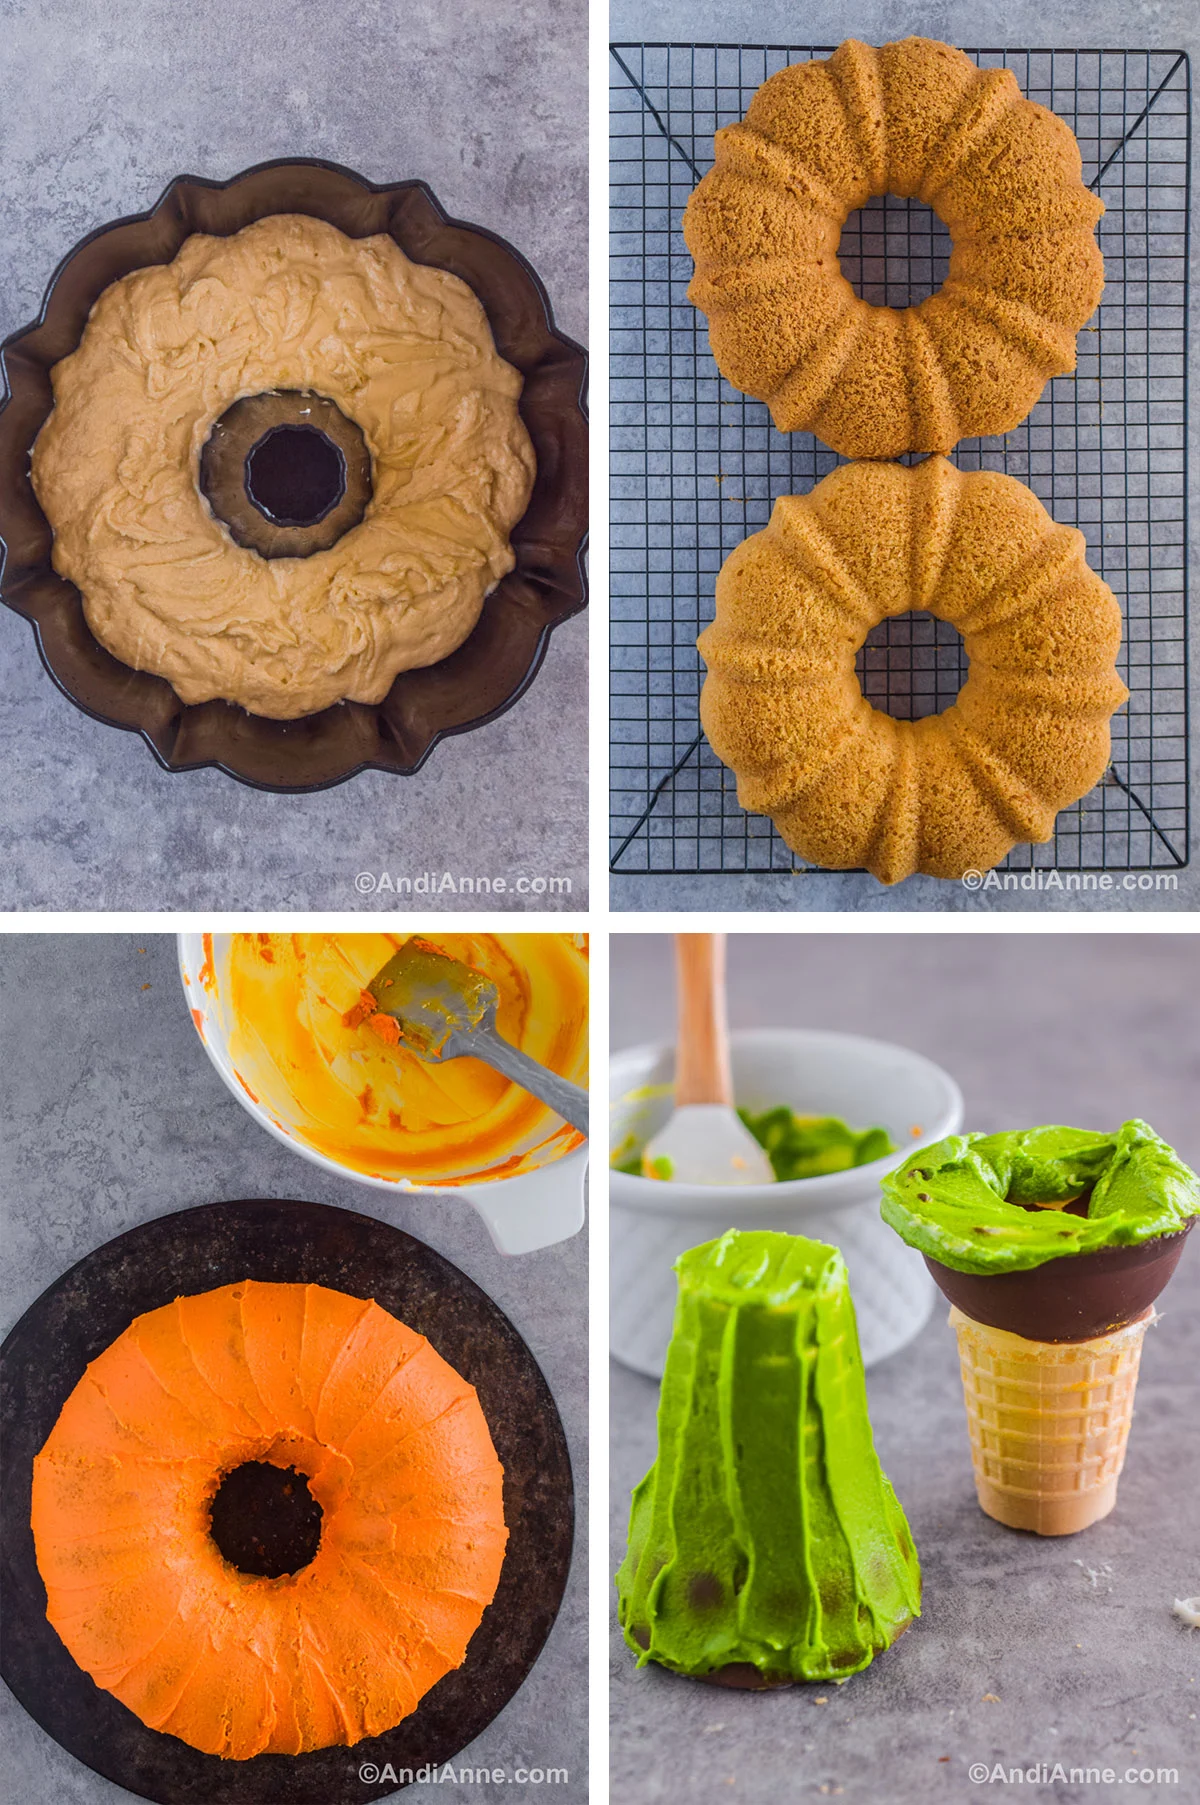 Four images showing steps to make the recipe. First is a bundt cake pan with cake batter inside. Second is two bundt cakes on a wire rack. Third is an frosted bundt cake with a bowl of leftover frosting. Fourth is two ice cream cones, one is frosted in green. The other has a top that's frosted.